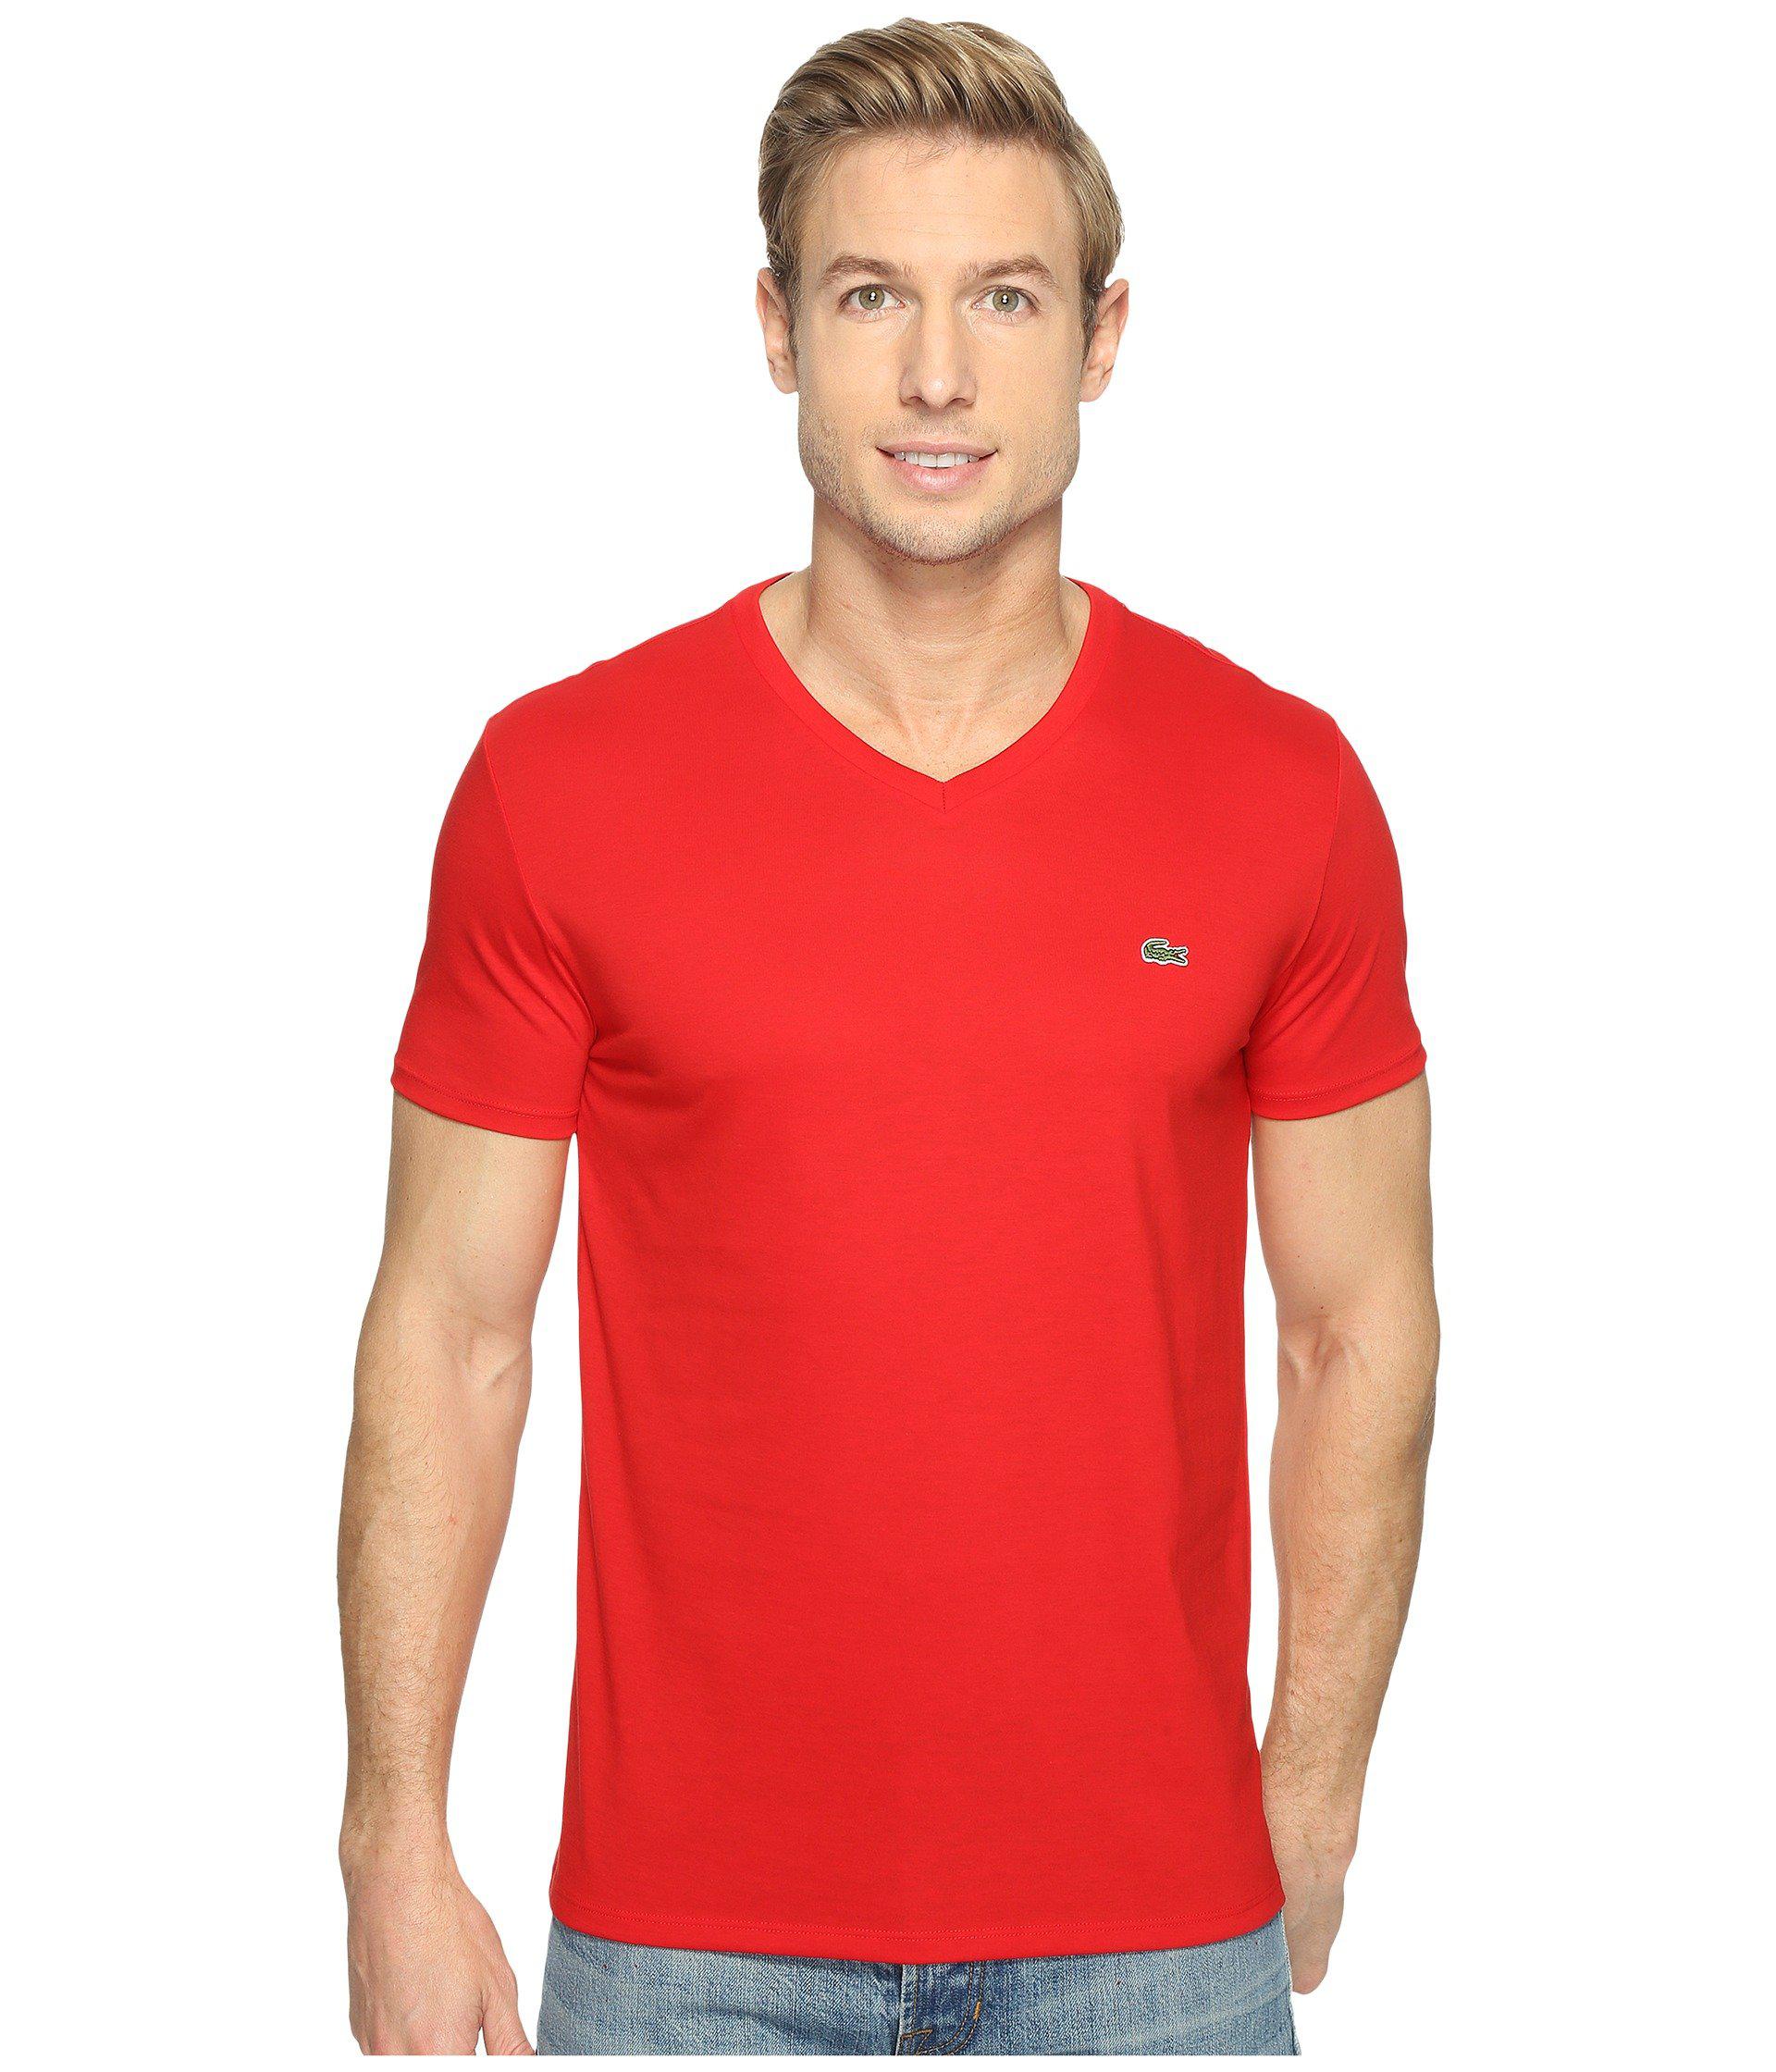 Lacoste Cotton S/s Pima Jersey V-neck T-shirt in Red for Men - Save 20% ...